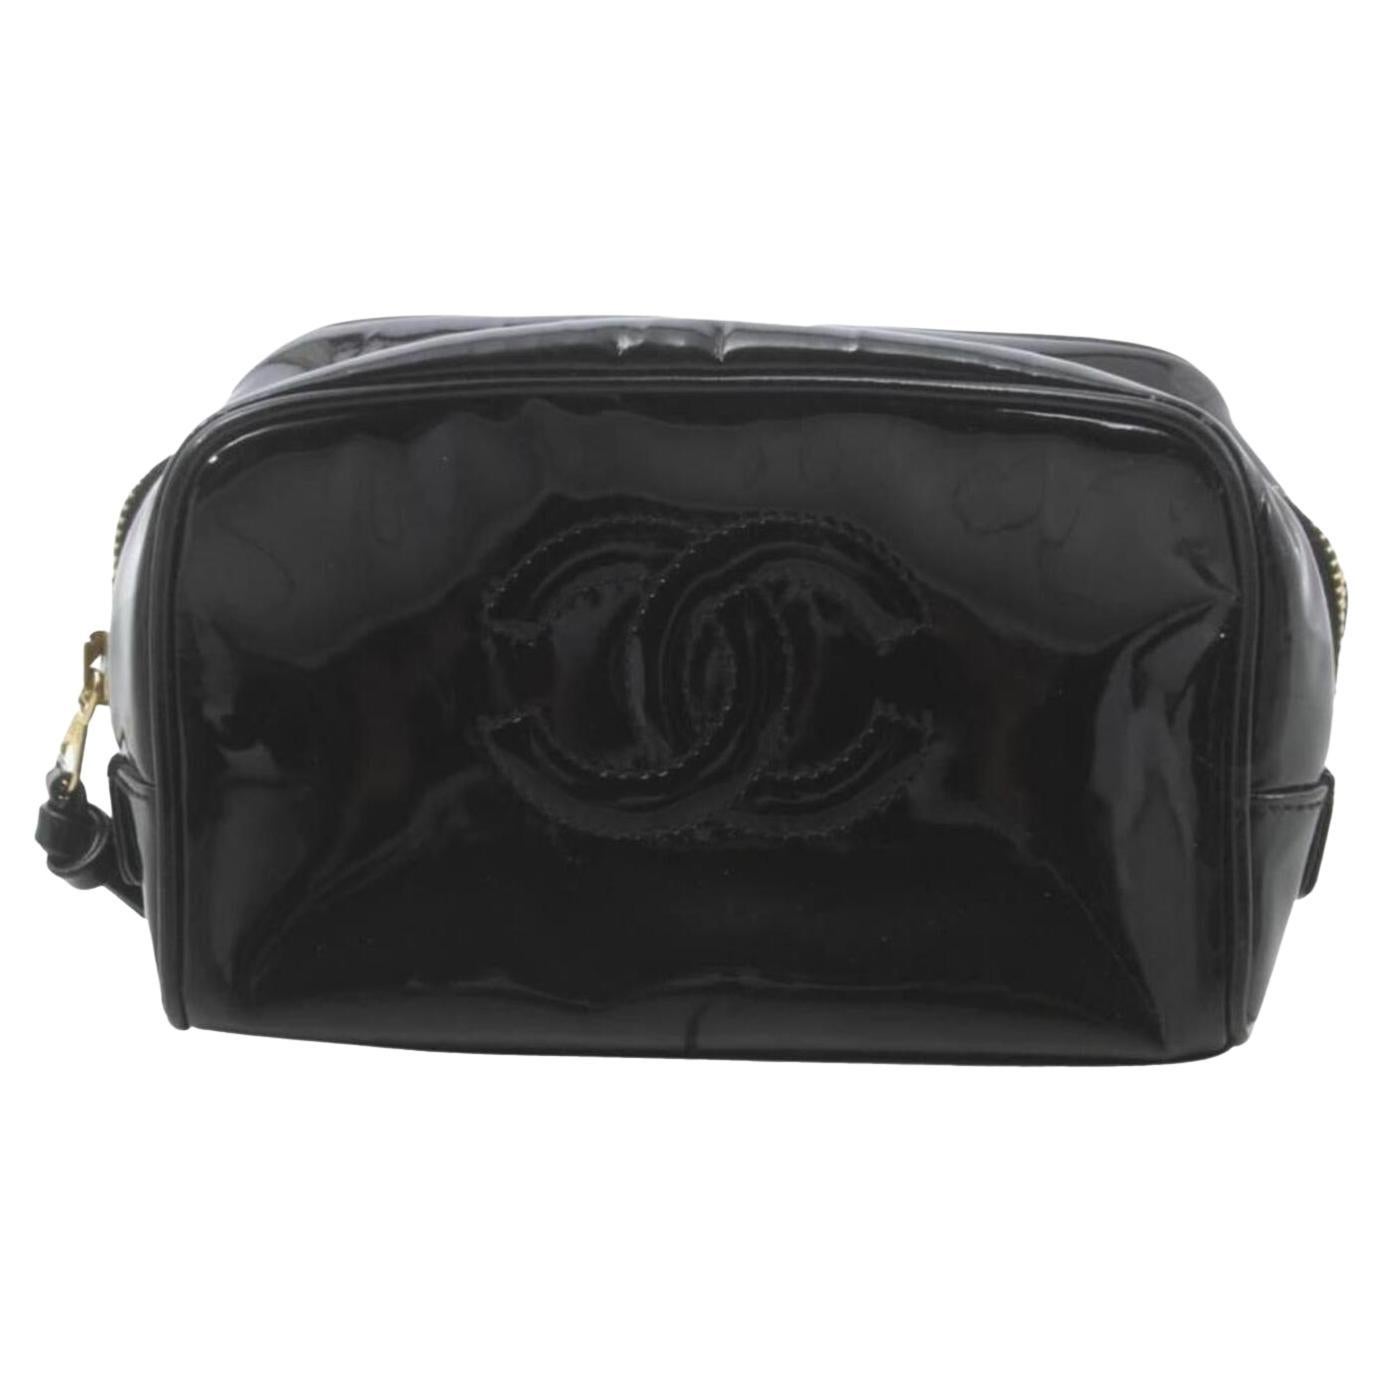 Chanel Black Patent CC Cosmetic Case Make Up Pouch 861943